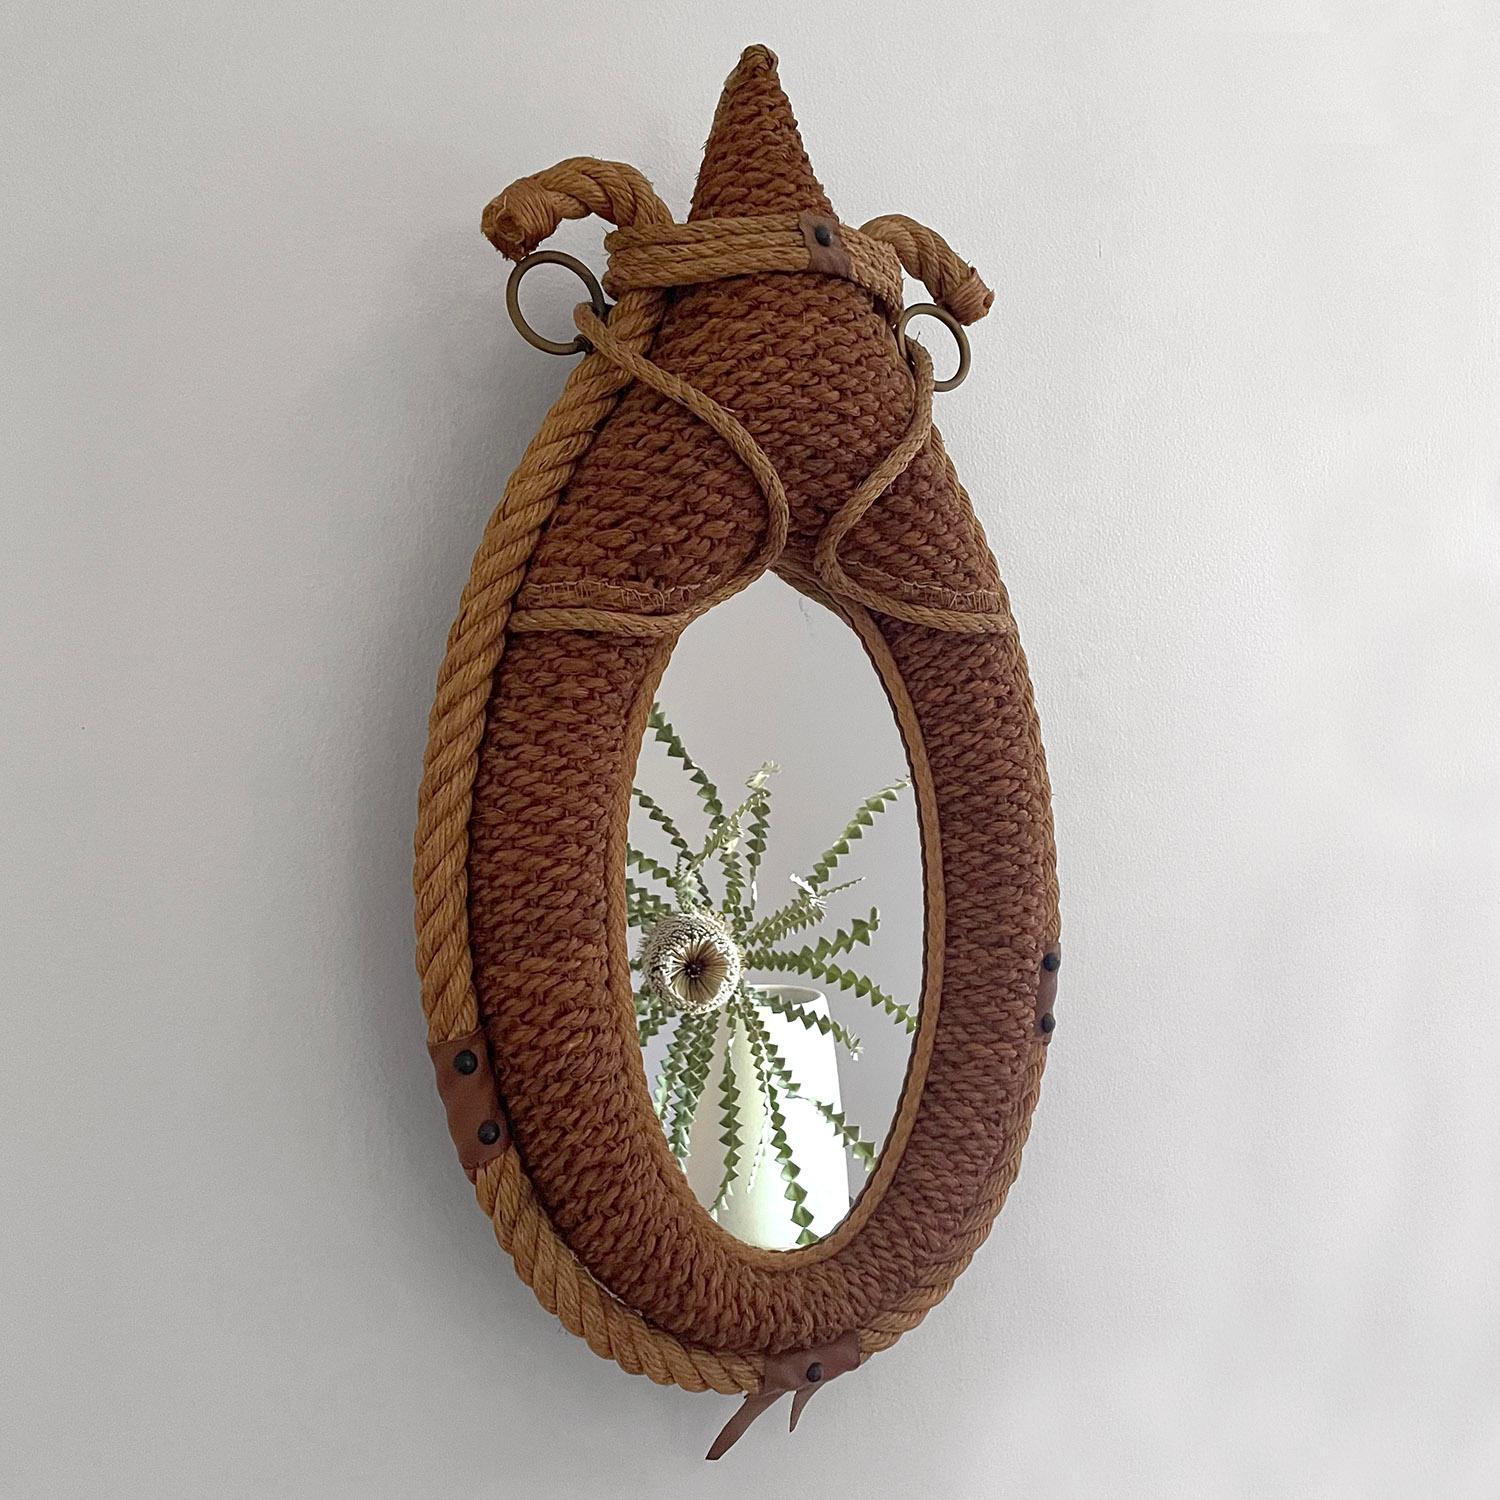 Adrien Audoux & Frida Minet rope wall mirror
France, circa 1950’s
Original oval shaped mirror has light fogging 
Mirror frame comprised of signature braided rope
Accented with a variety of adornments and aged leather banding with stud rivet